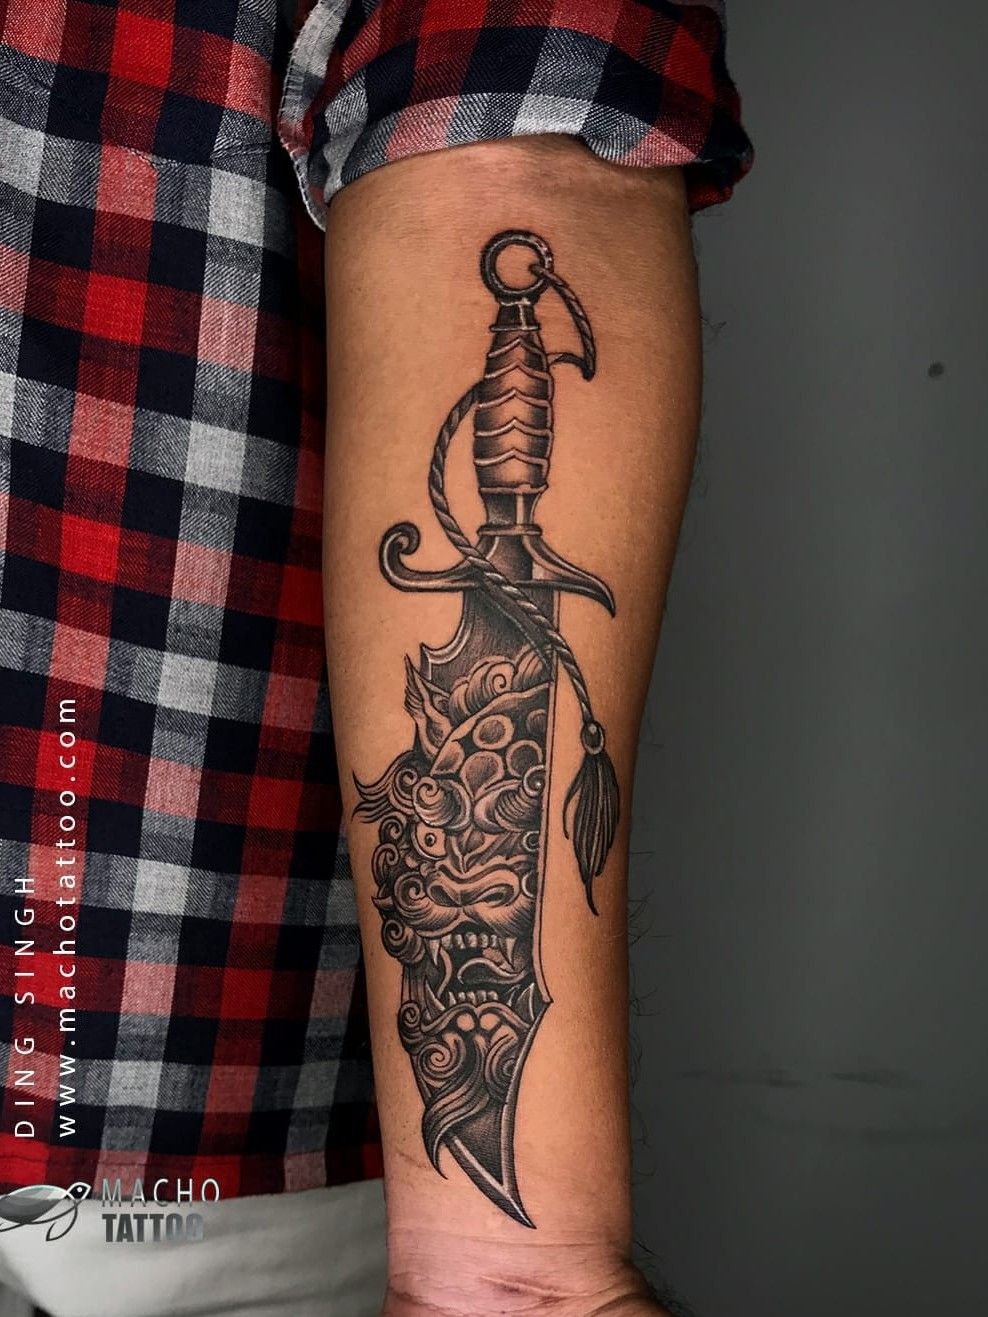 69 Striking Dagger Tattoos With Meaning - Our Mindful Life